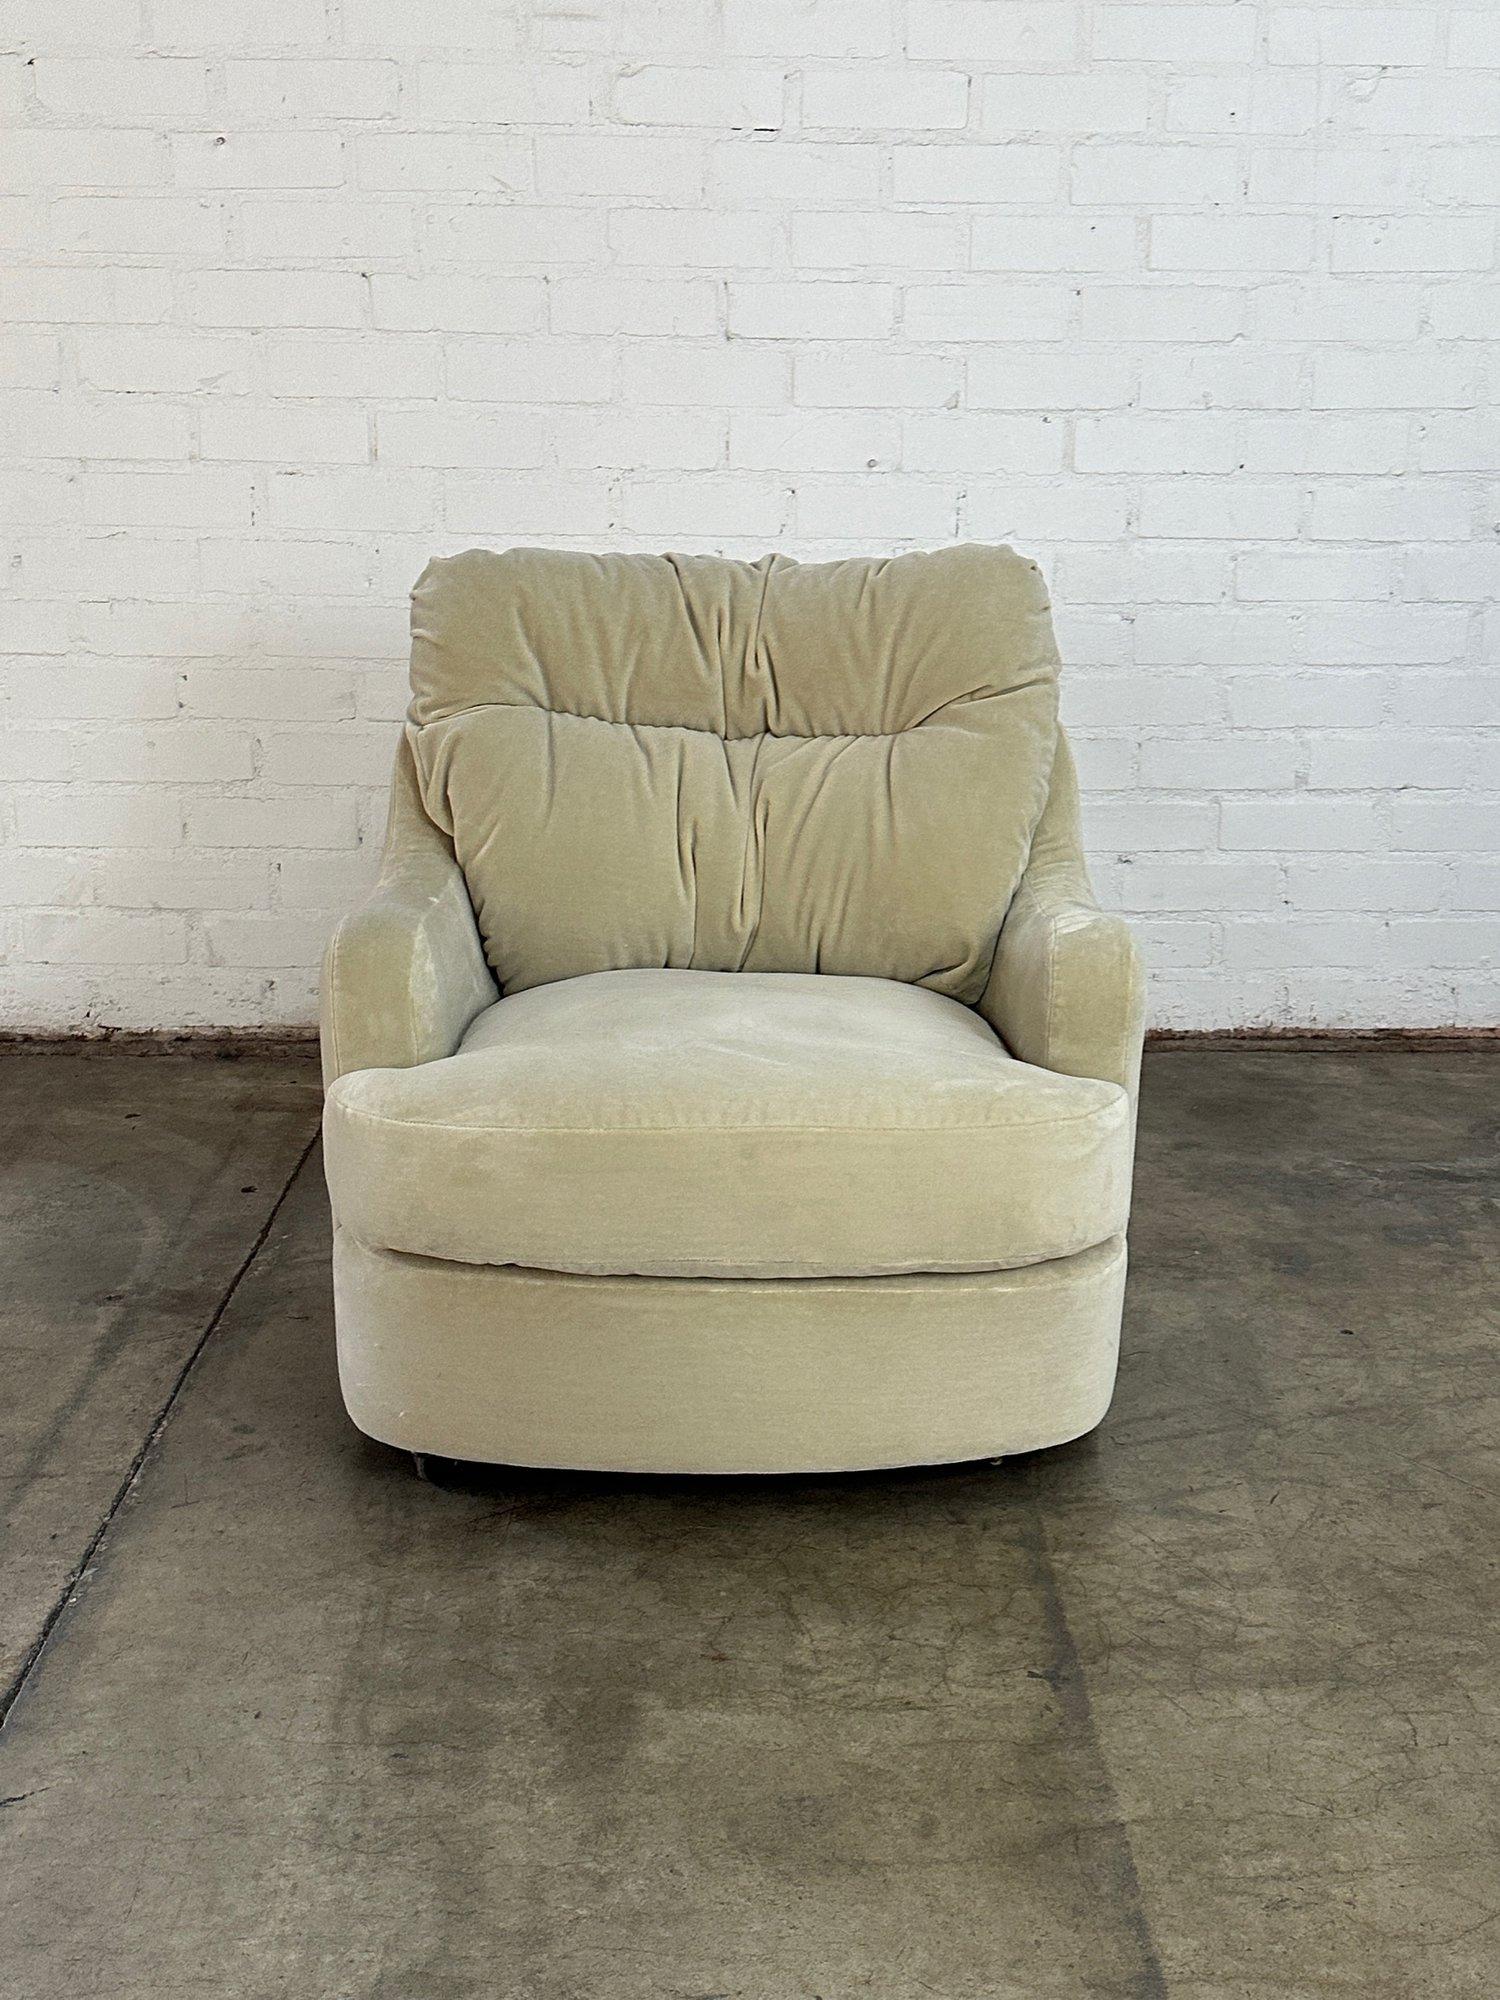 Post-Modern Oversized Lounge chair and ottoman For Sale